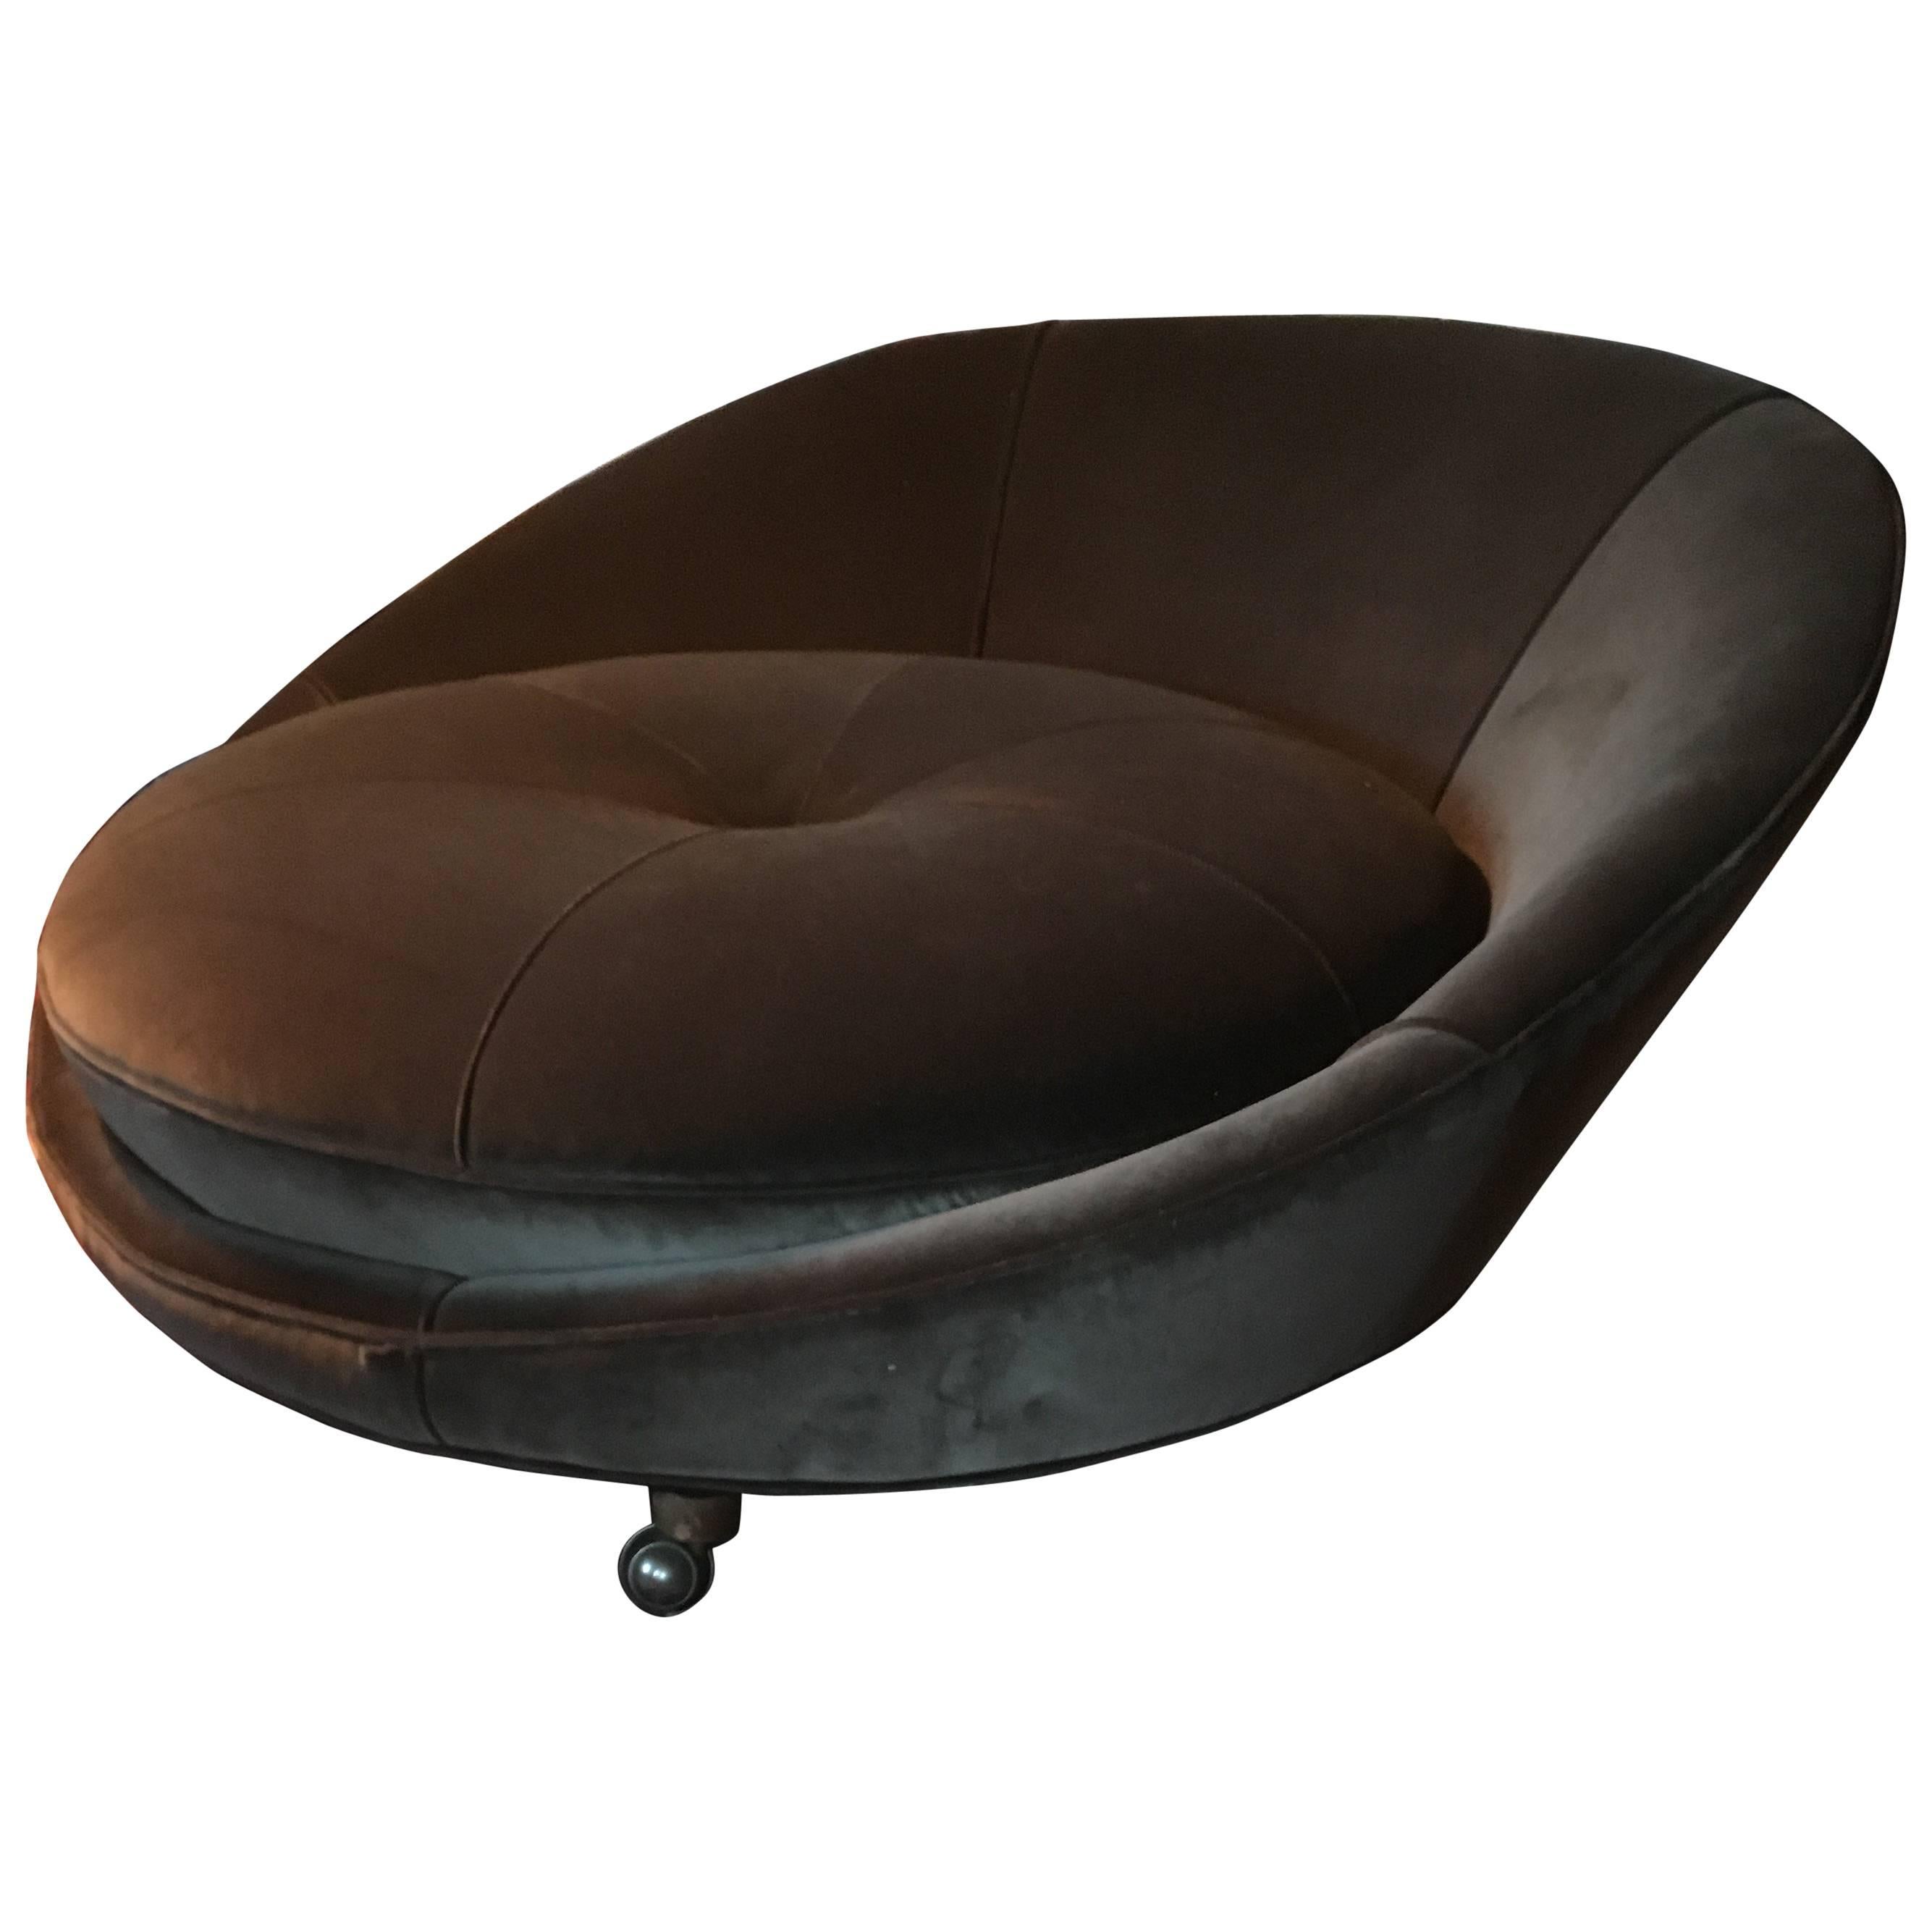 Large Round Lounge Chair by Milo Baughman